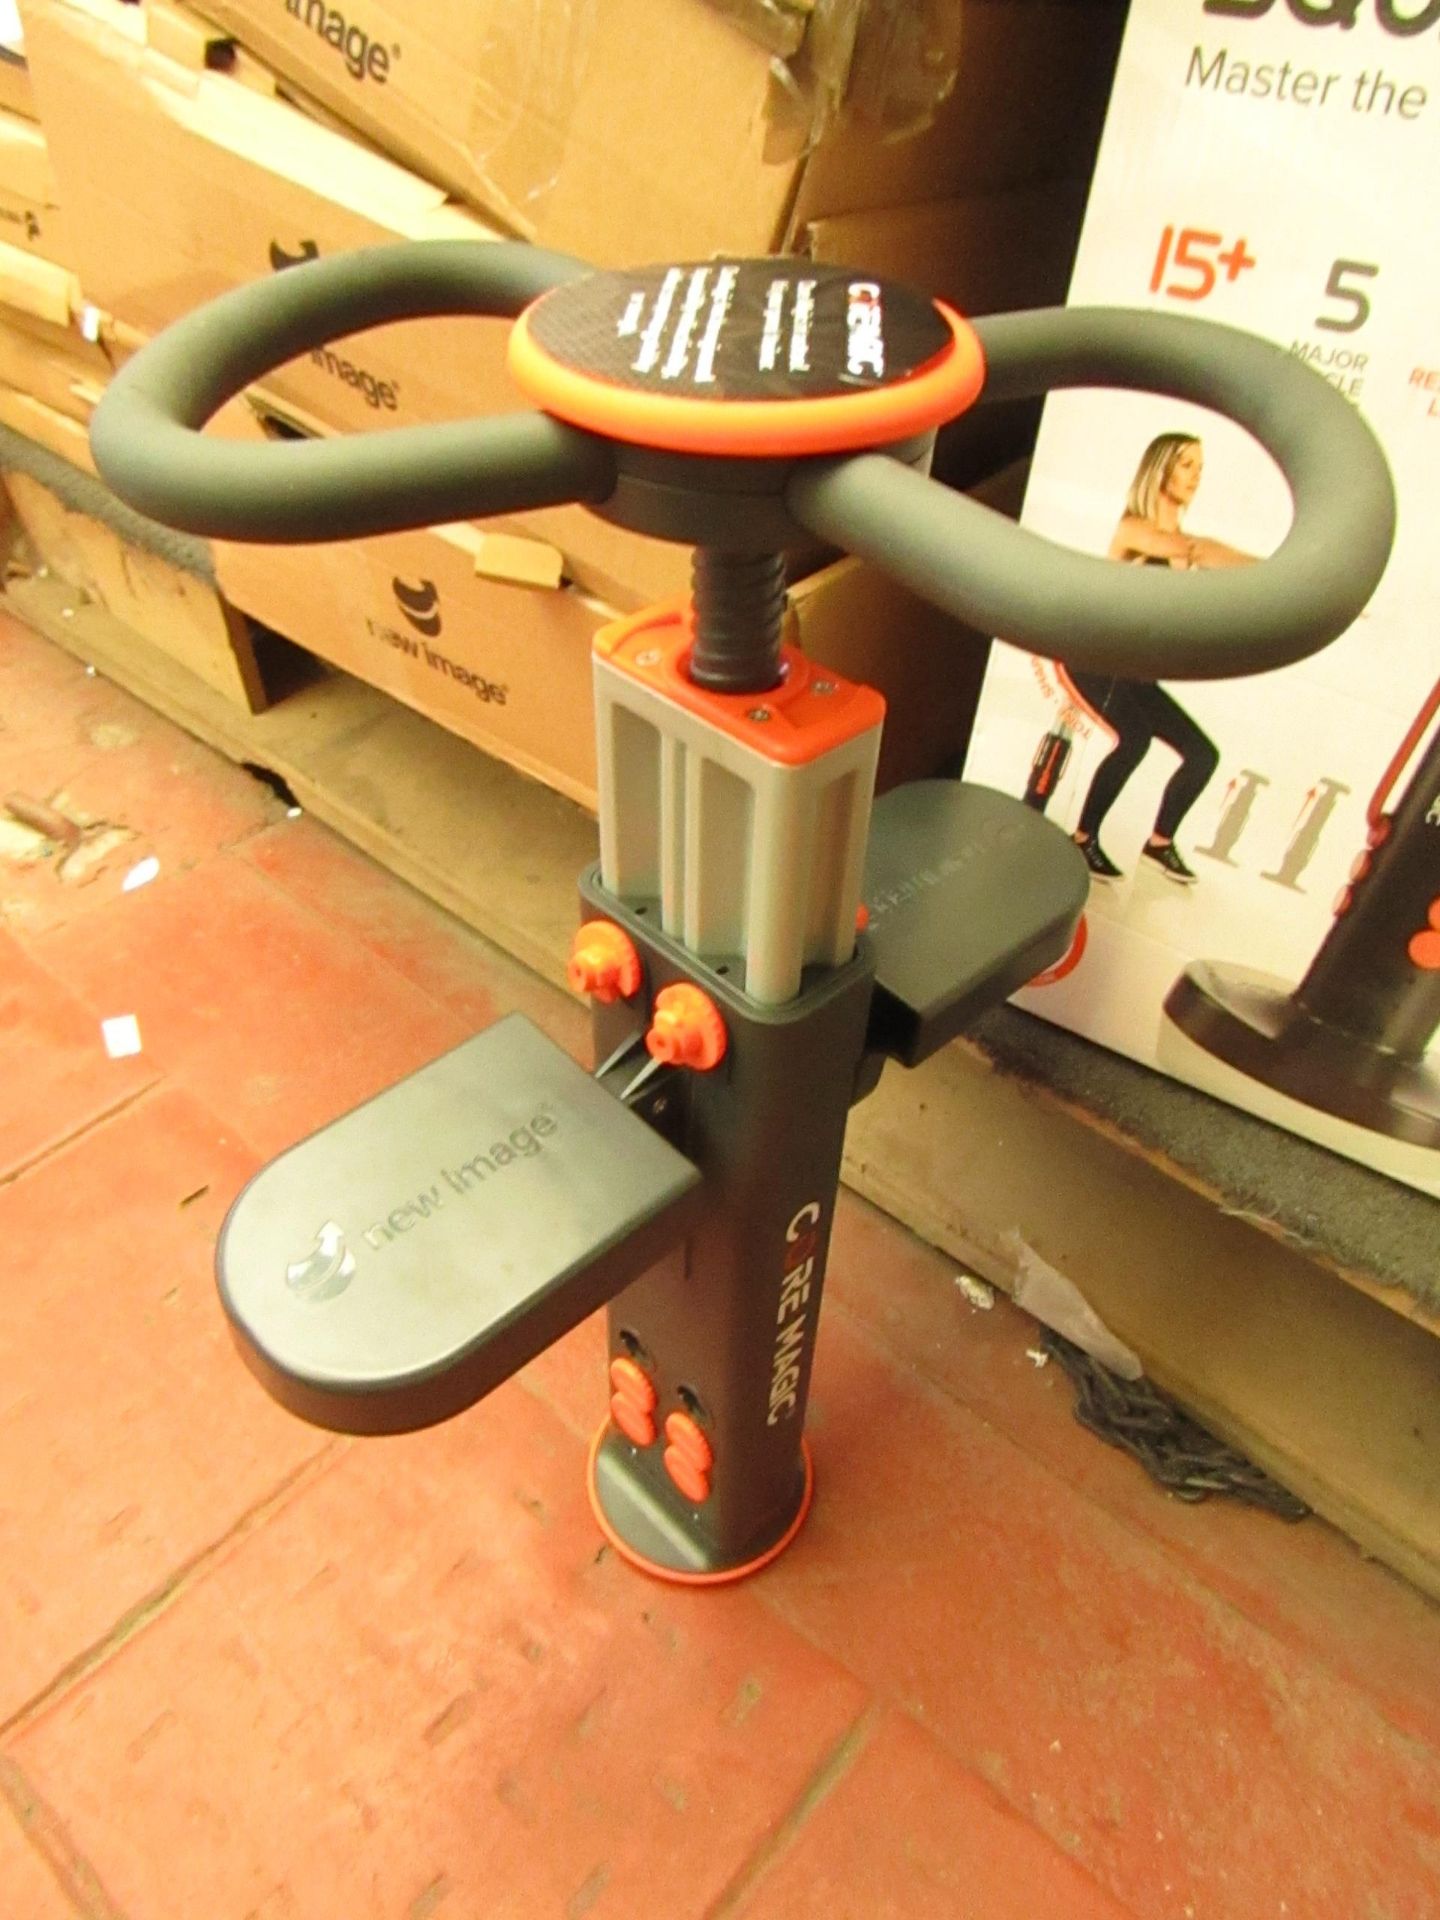 | 1x | NEW IMAGE CORE MAGIC AB TRAINER | UNTESTED & BOXED | NO ONLINE RE-SALE | SKU - | RRP £59.99 |